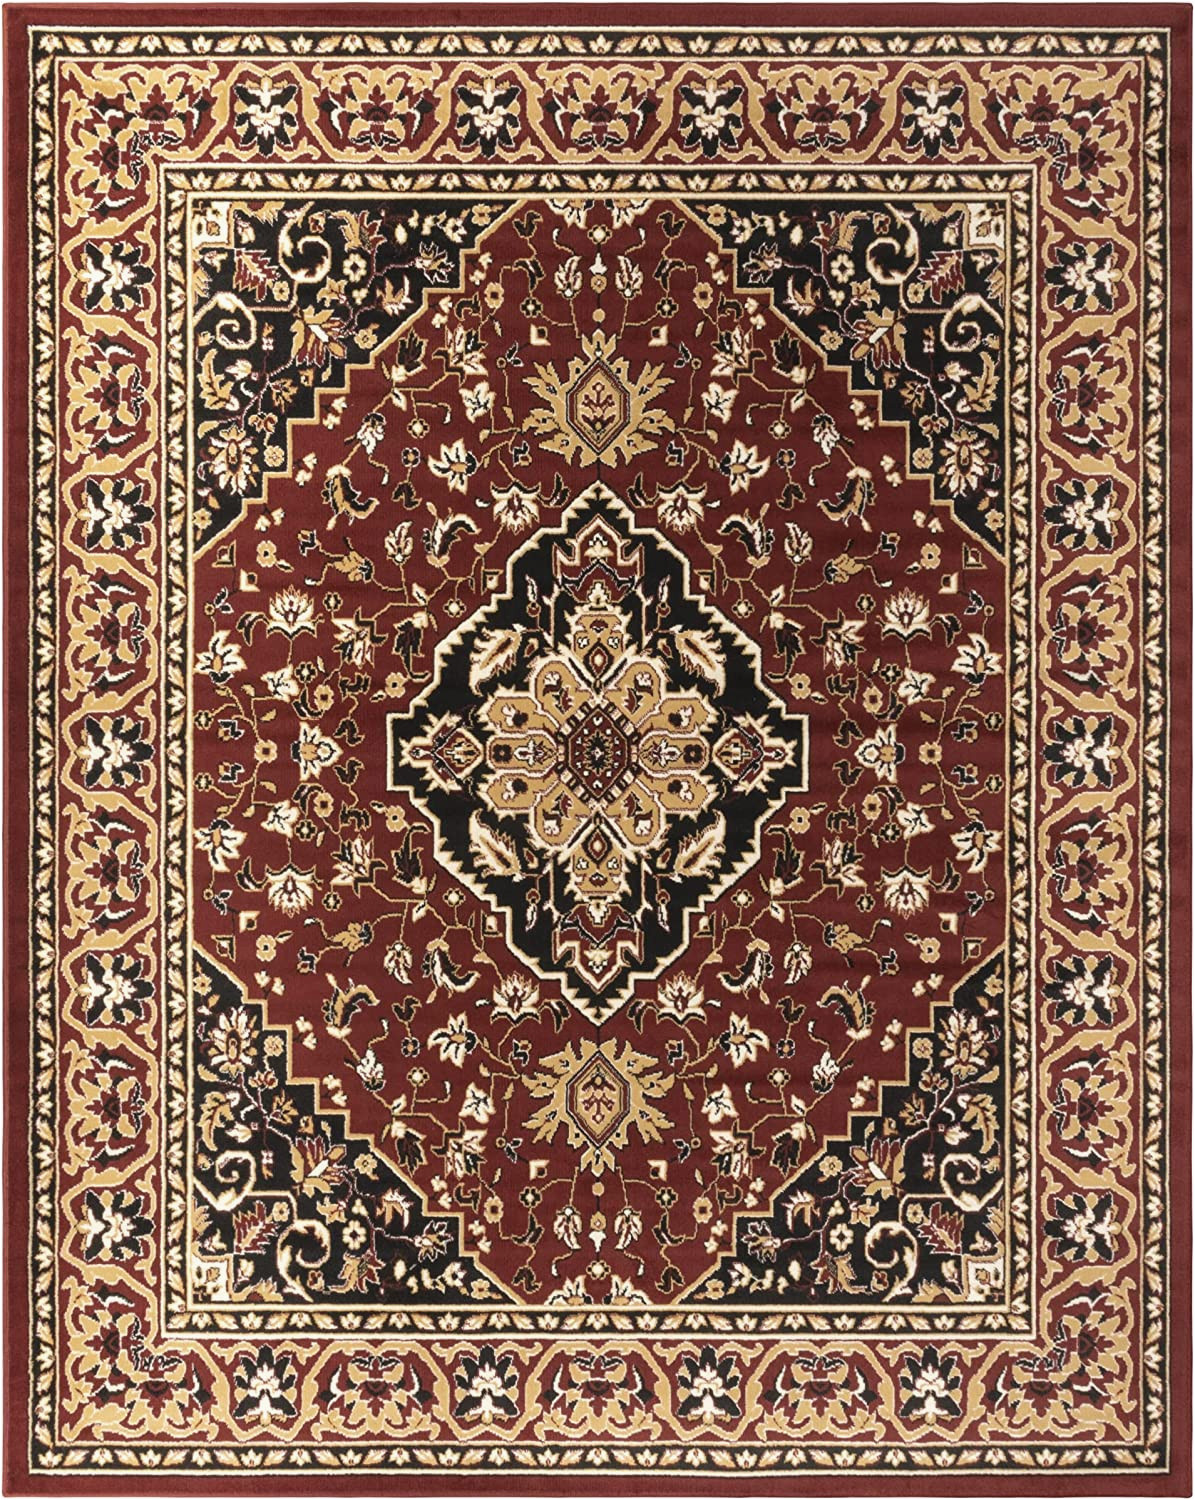 Superior Elegant Glendale Collection area Rug Buy Superior Elegant Glendale Collection area Rug, 8mm Pile Height …